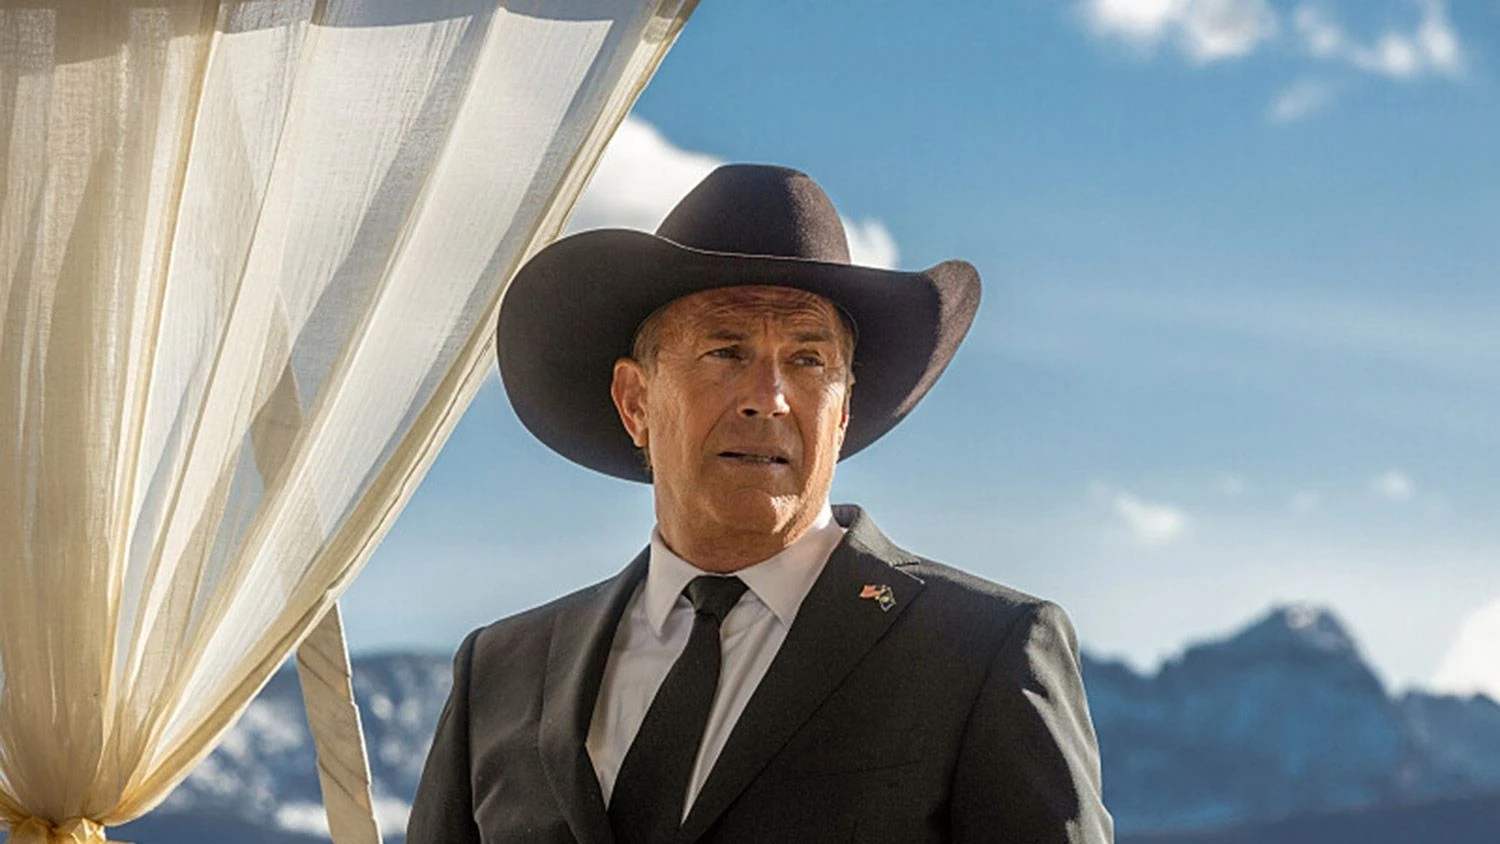 Will 'Yellowstone' Keep Going? Inside the Drama and New Plans Beyond Season 5